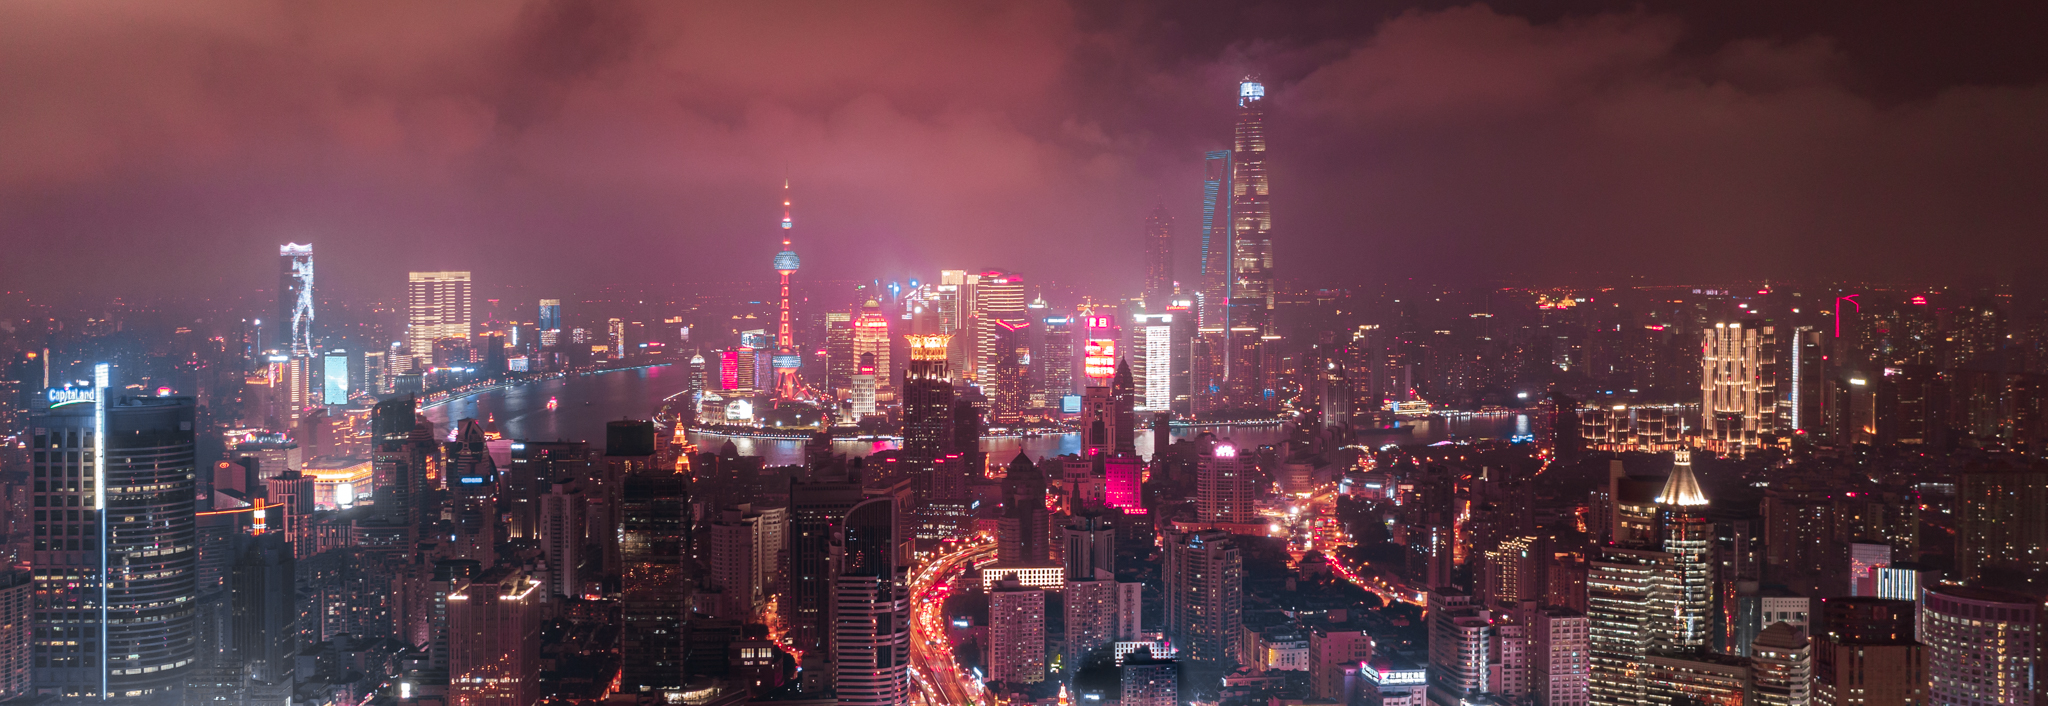 tall buildings, cityscape photography, glowing city lights, urban metropolis, pink-red clouds, vibrant city skyline, shanghai skyscrapers, iconic landmarks, urban night scene, milky cityscape, magenta city lights, river cutting metropolis, shanghai citysc, Druz Denys